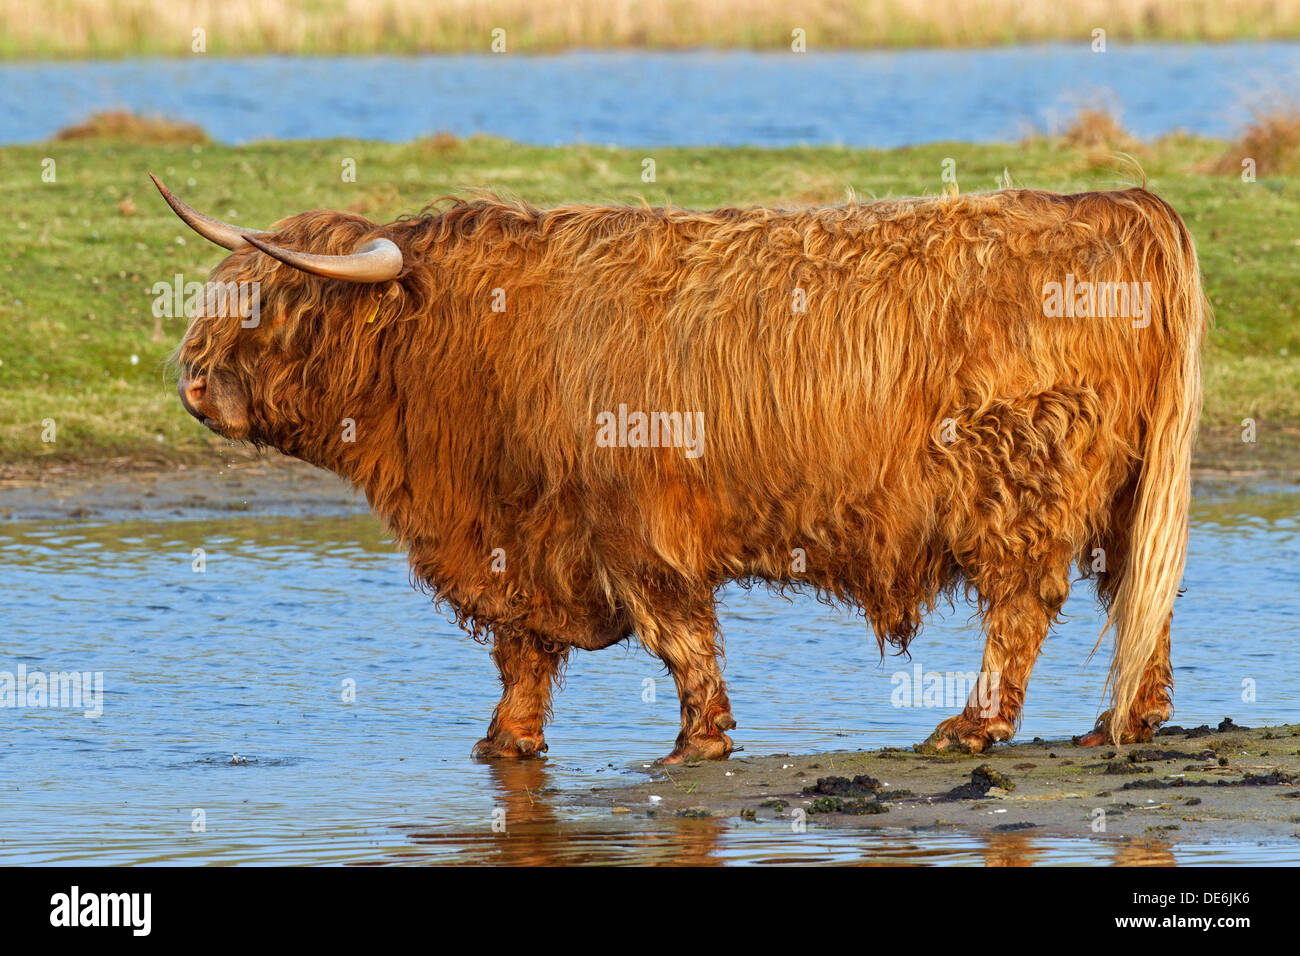 Red Highland Cattle (Bos taurus) bull with large horns in field Stock Photo